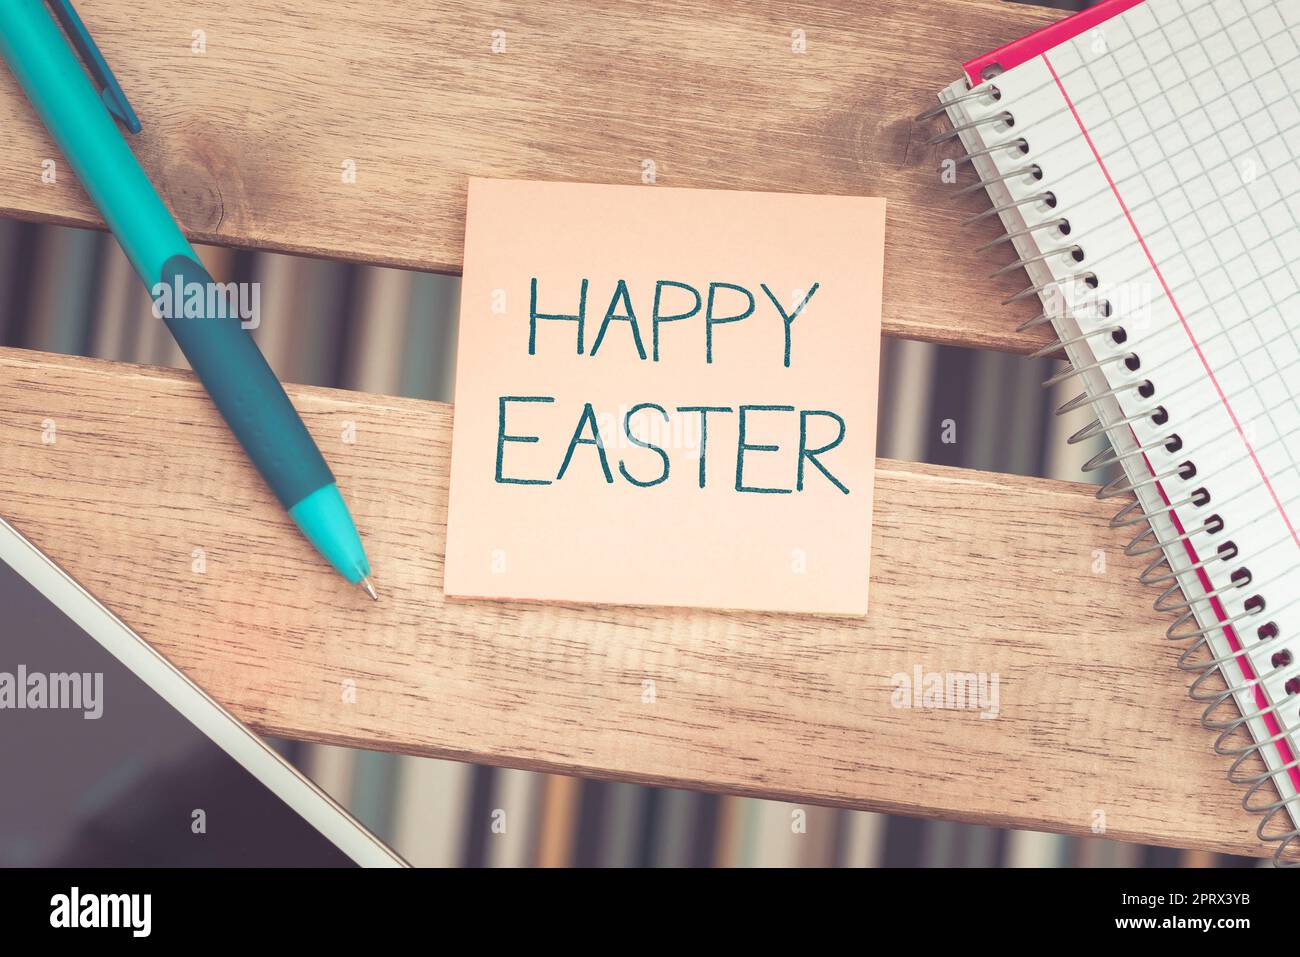 Writing displaying text Happy Easter. Concept meaning Christian feast commemorating the resurrection of Jesus Stock Photo